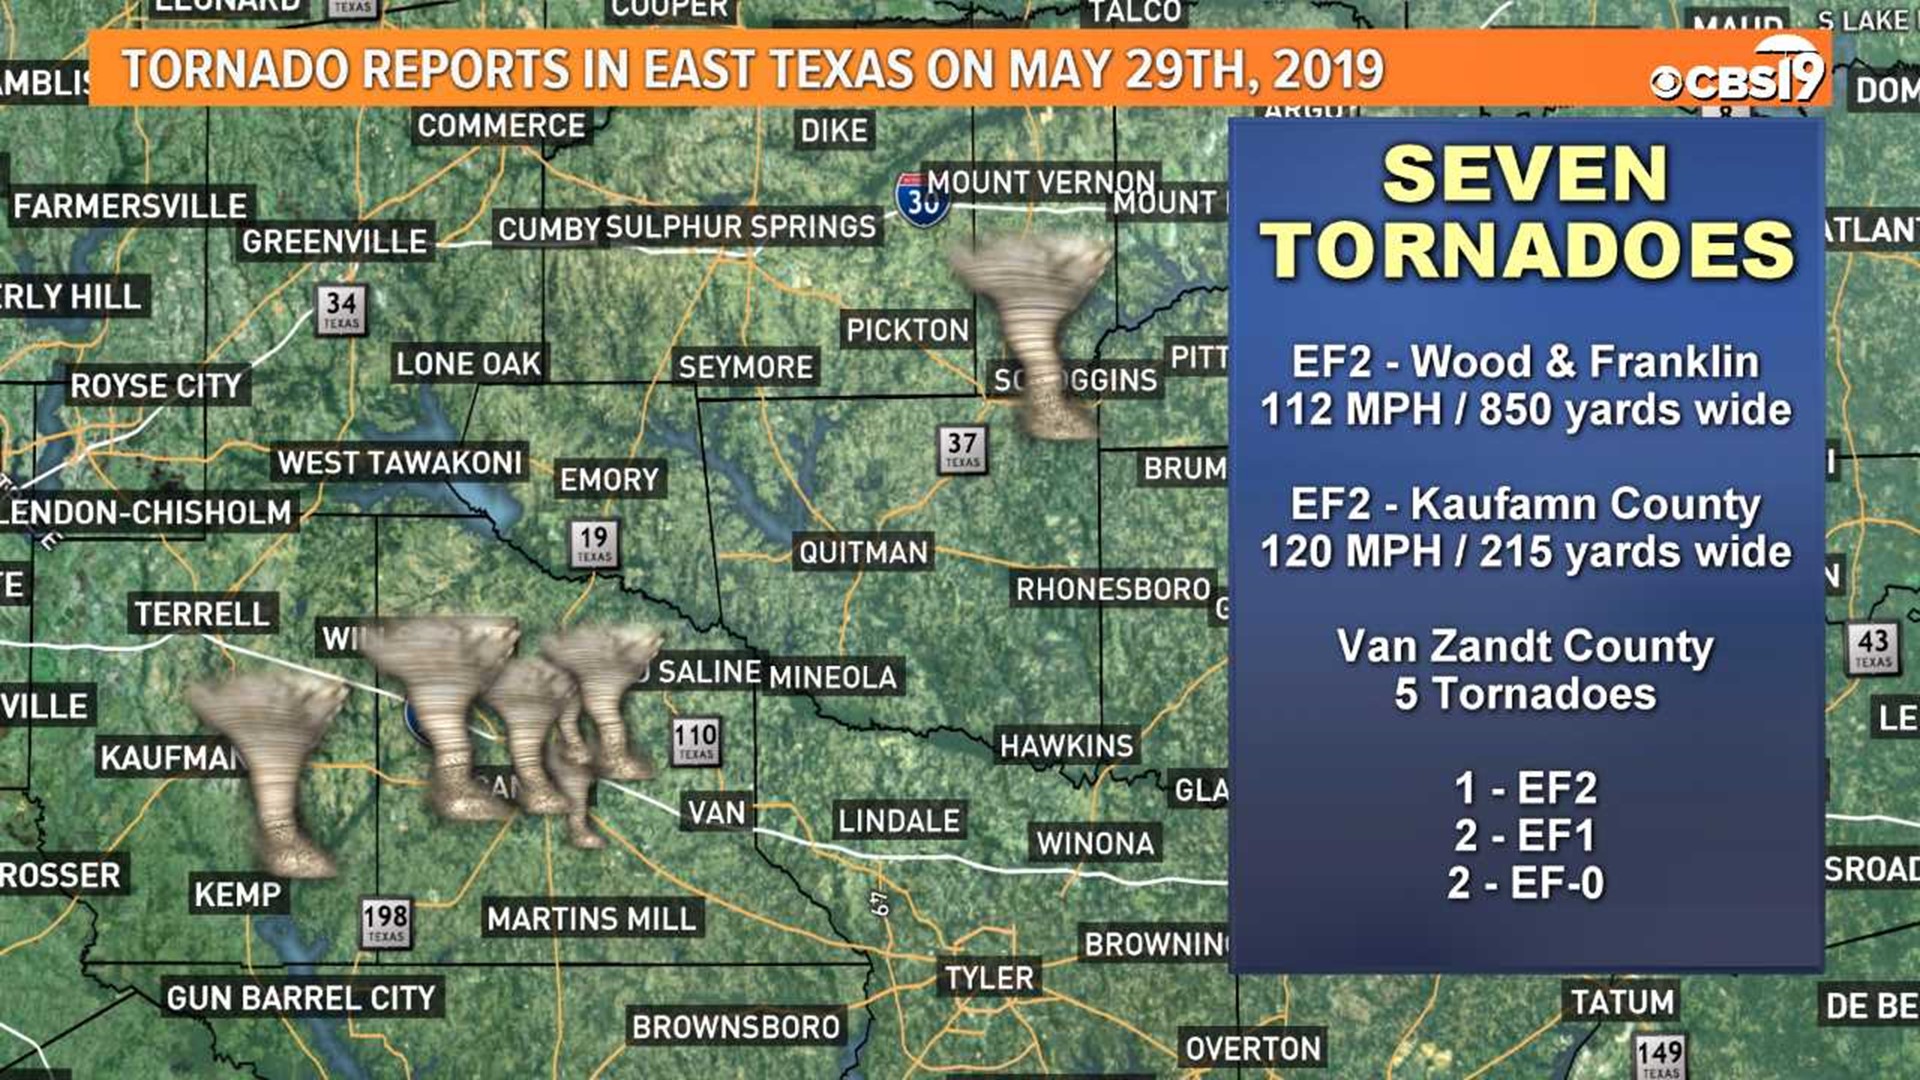 Nws Six Tornadoes Touched Down In East Texas Including Five In Canton Area Cbs19tv